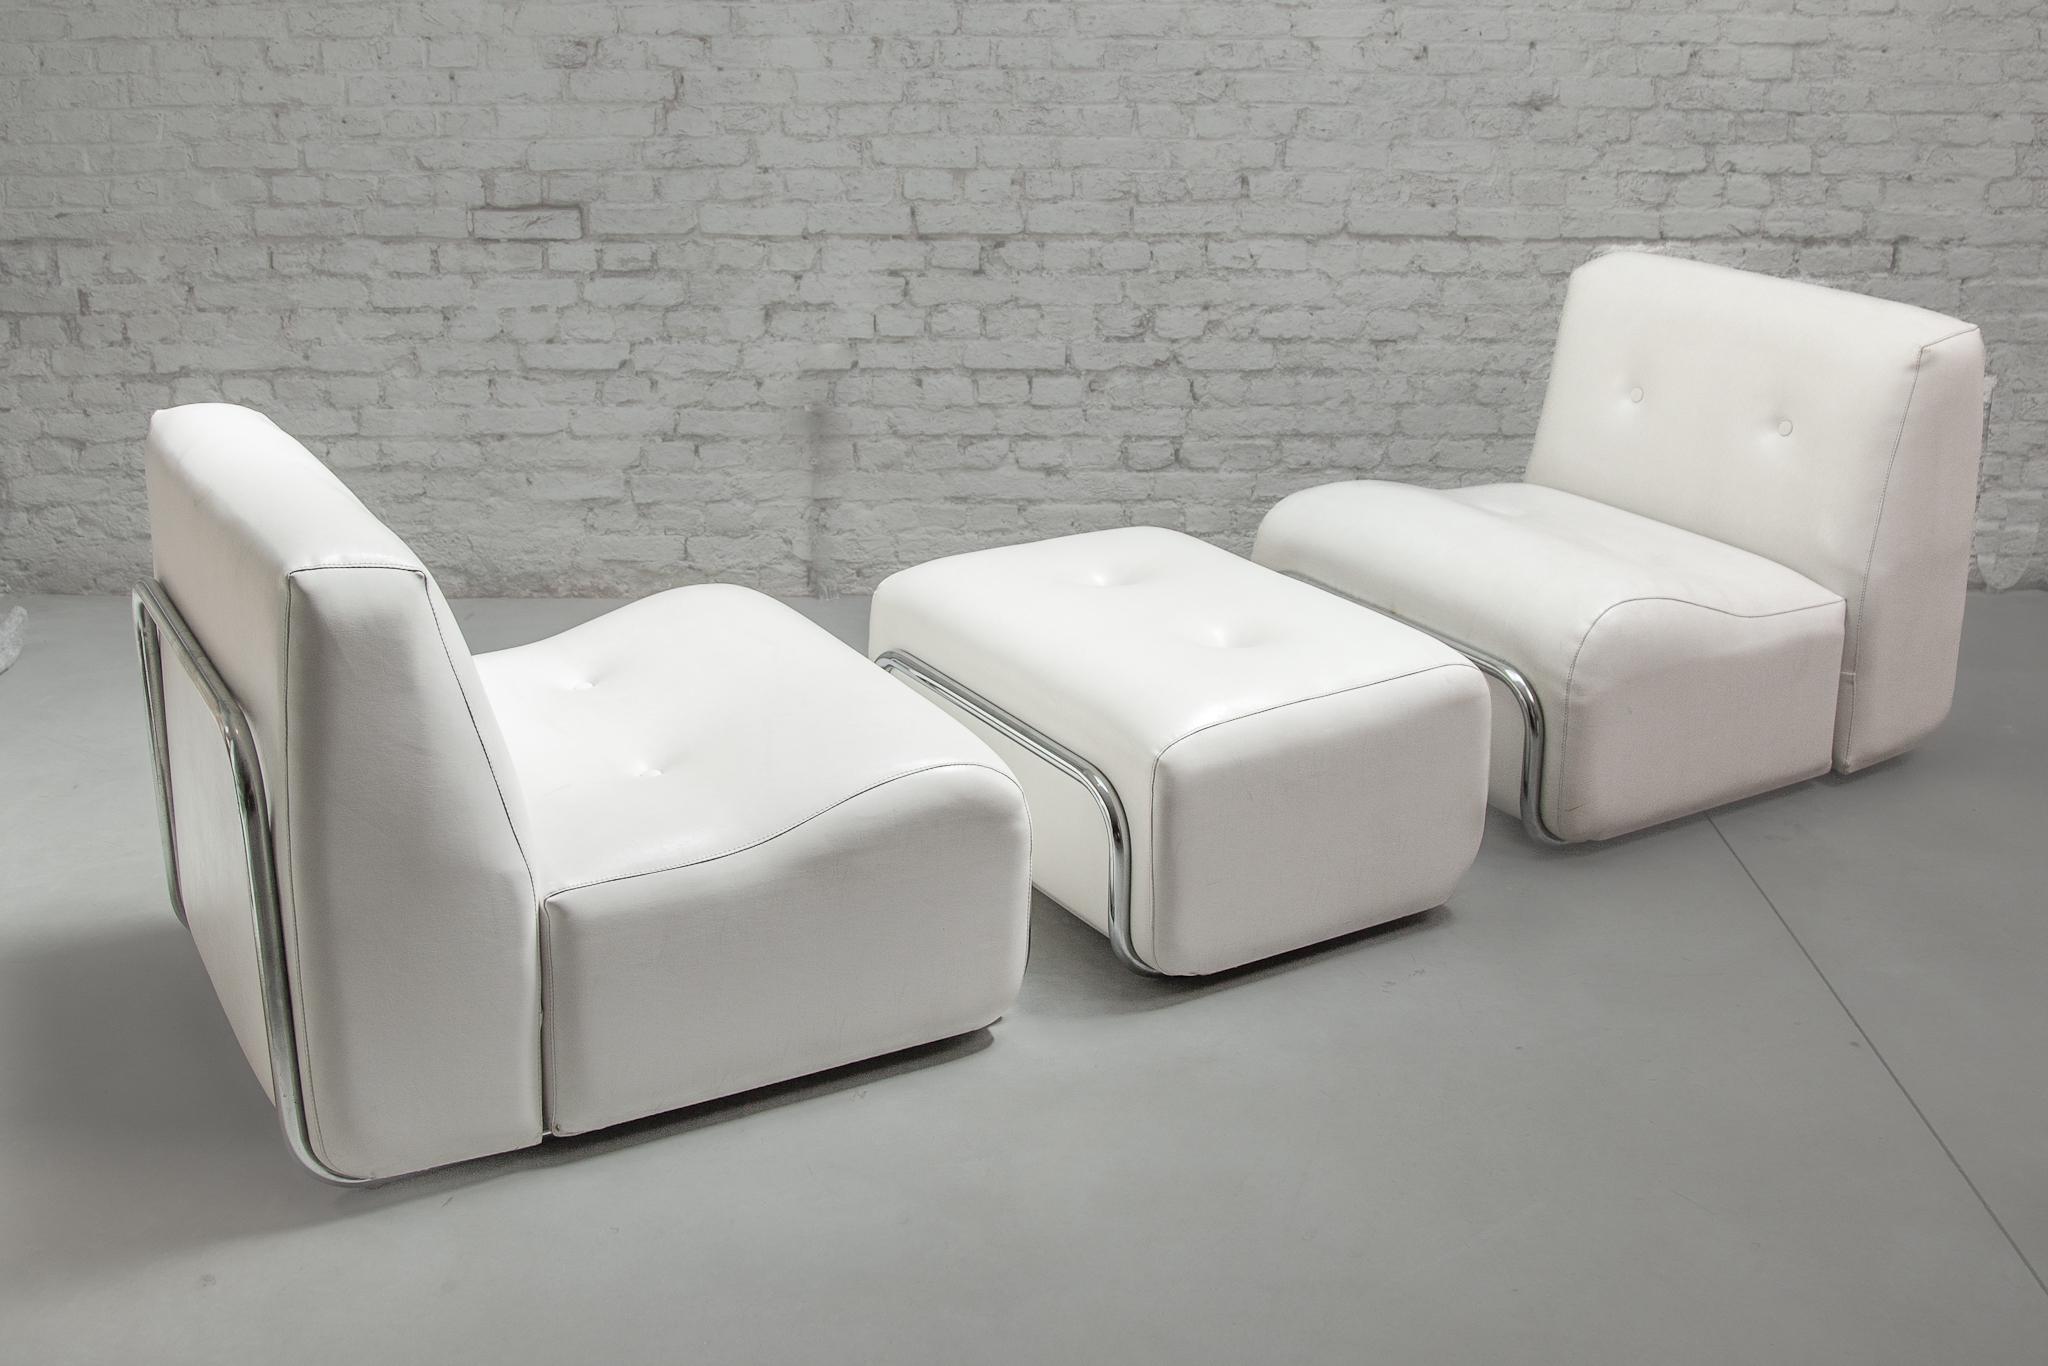 Modular Eight Chairs Living-roomset of Adriano Piazzesi Lounge Chairs and Stools For Sale 1